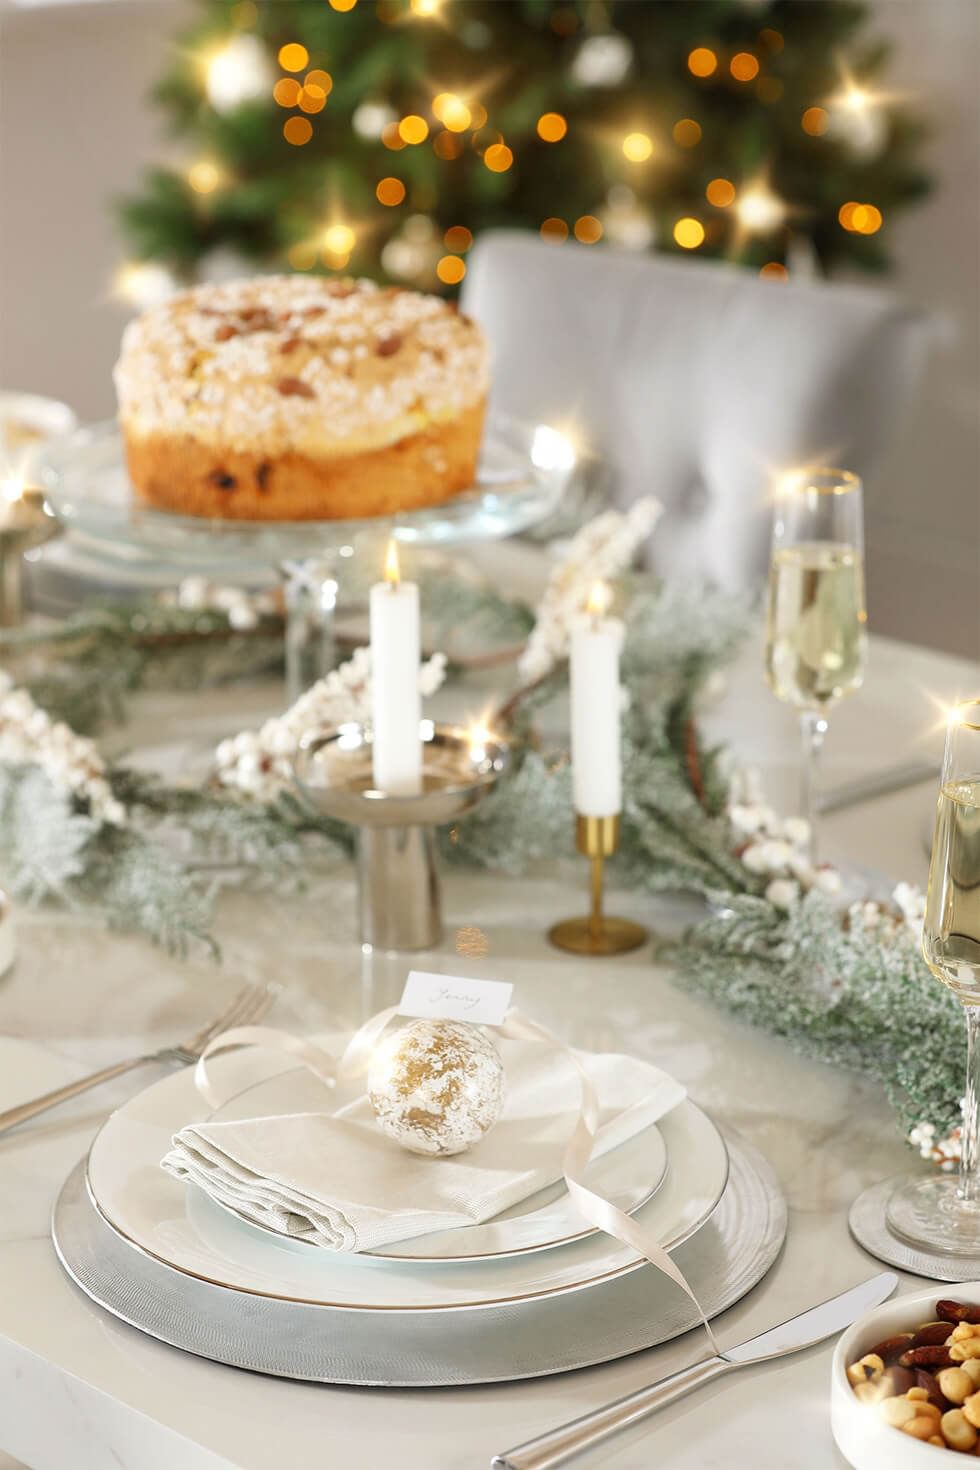 Table setting with Christmas baubles as decoration